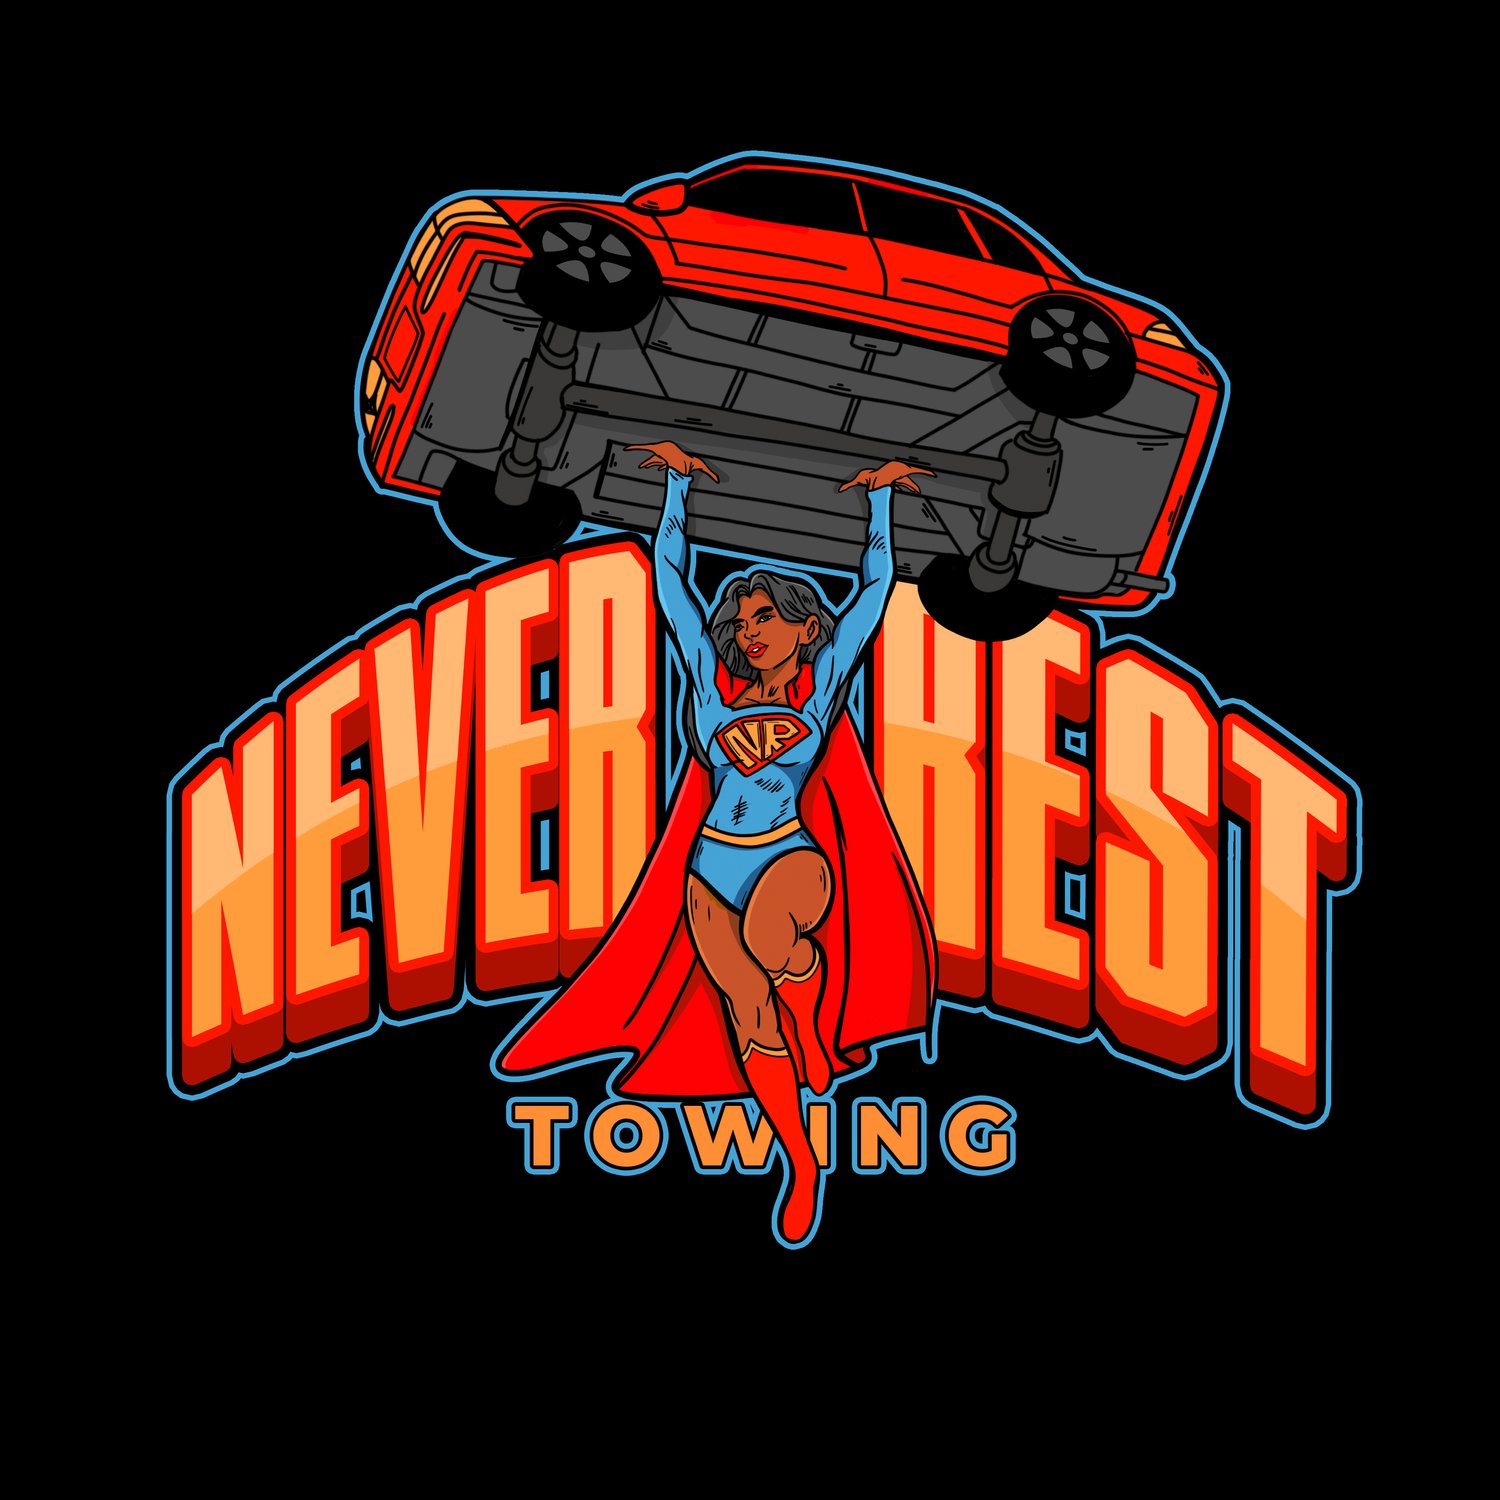 Never Rest Towing